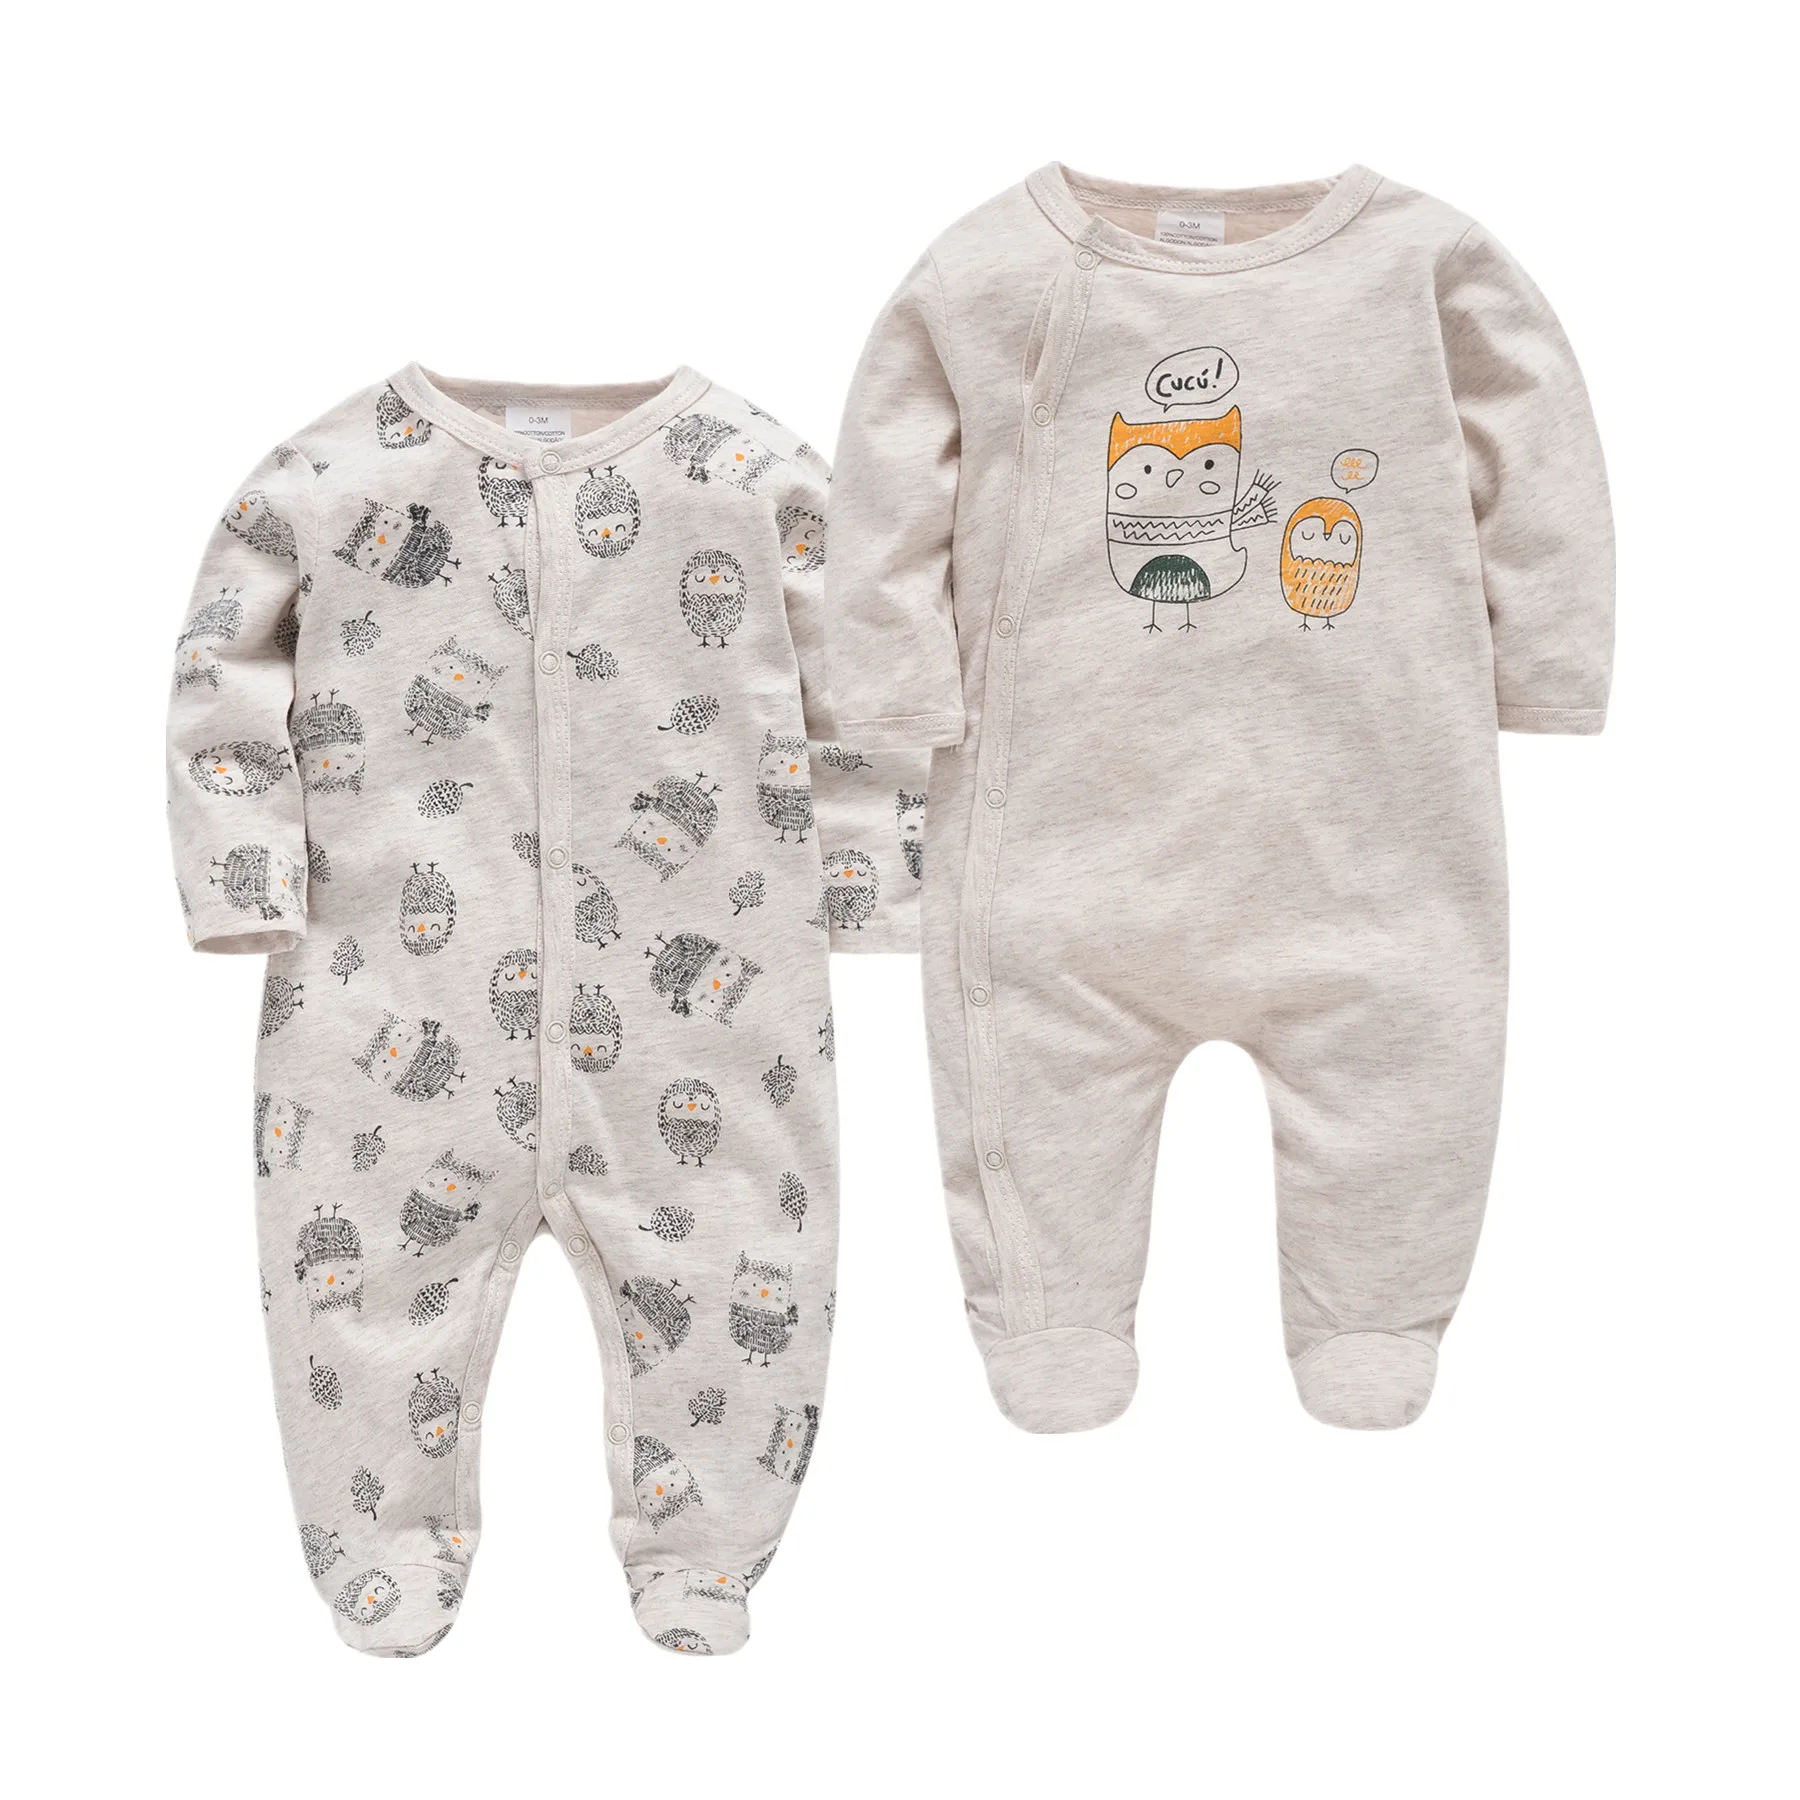 

New Born Baby Boys and Girls Clothes Set Organic Cotton Baby Jumpsuit Long Sleeve Romper Cute Infant One-piece Onesie Bib Hats